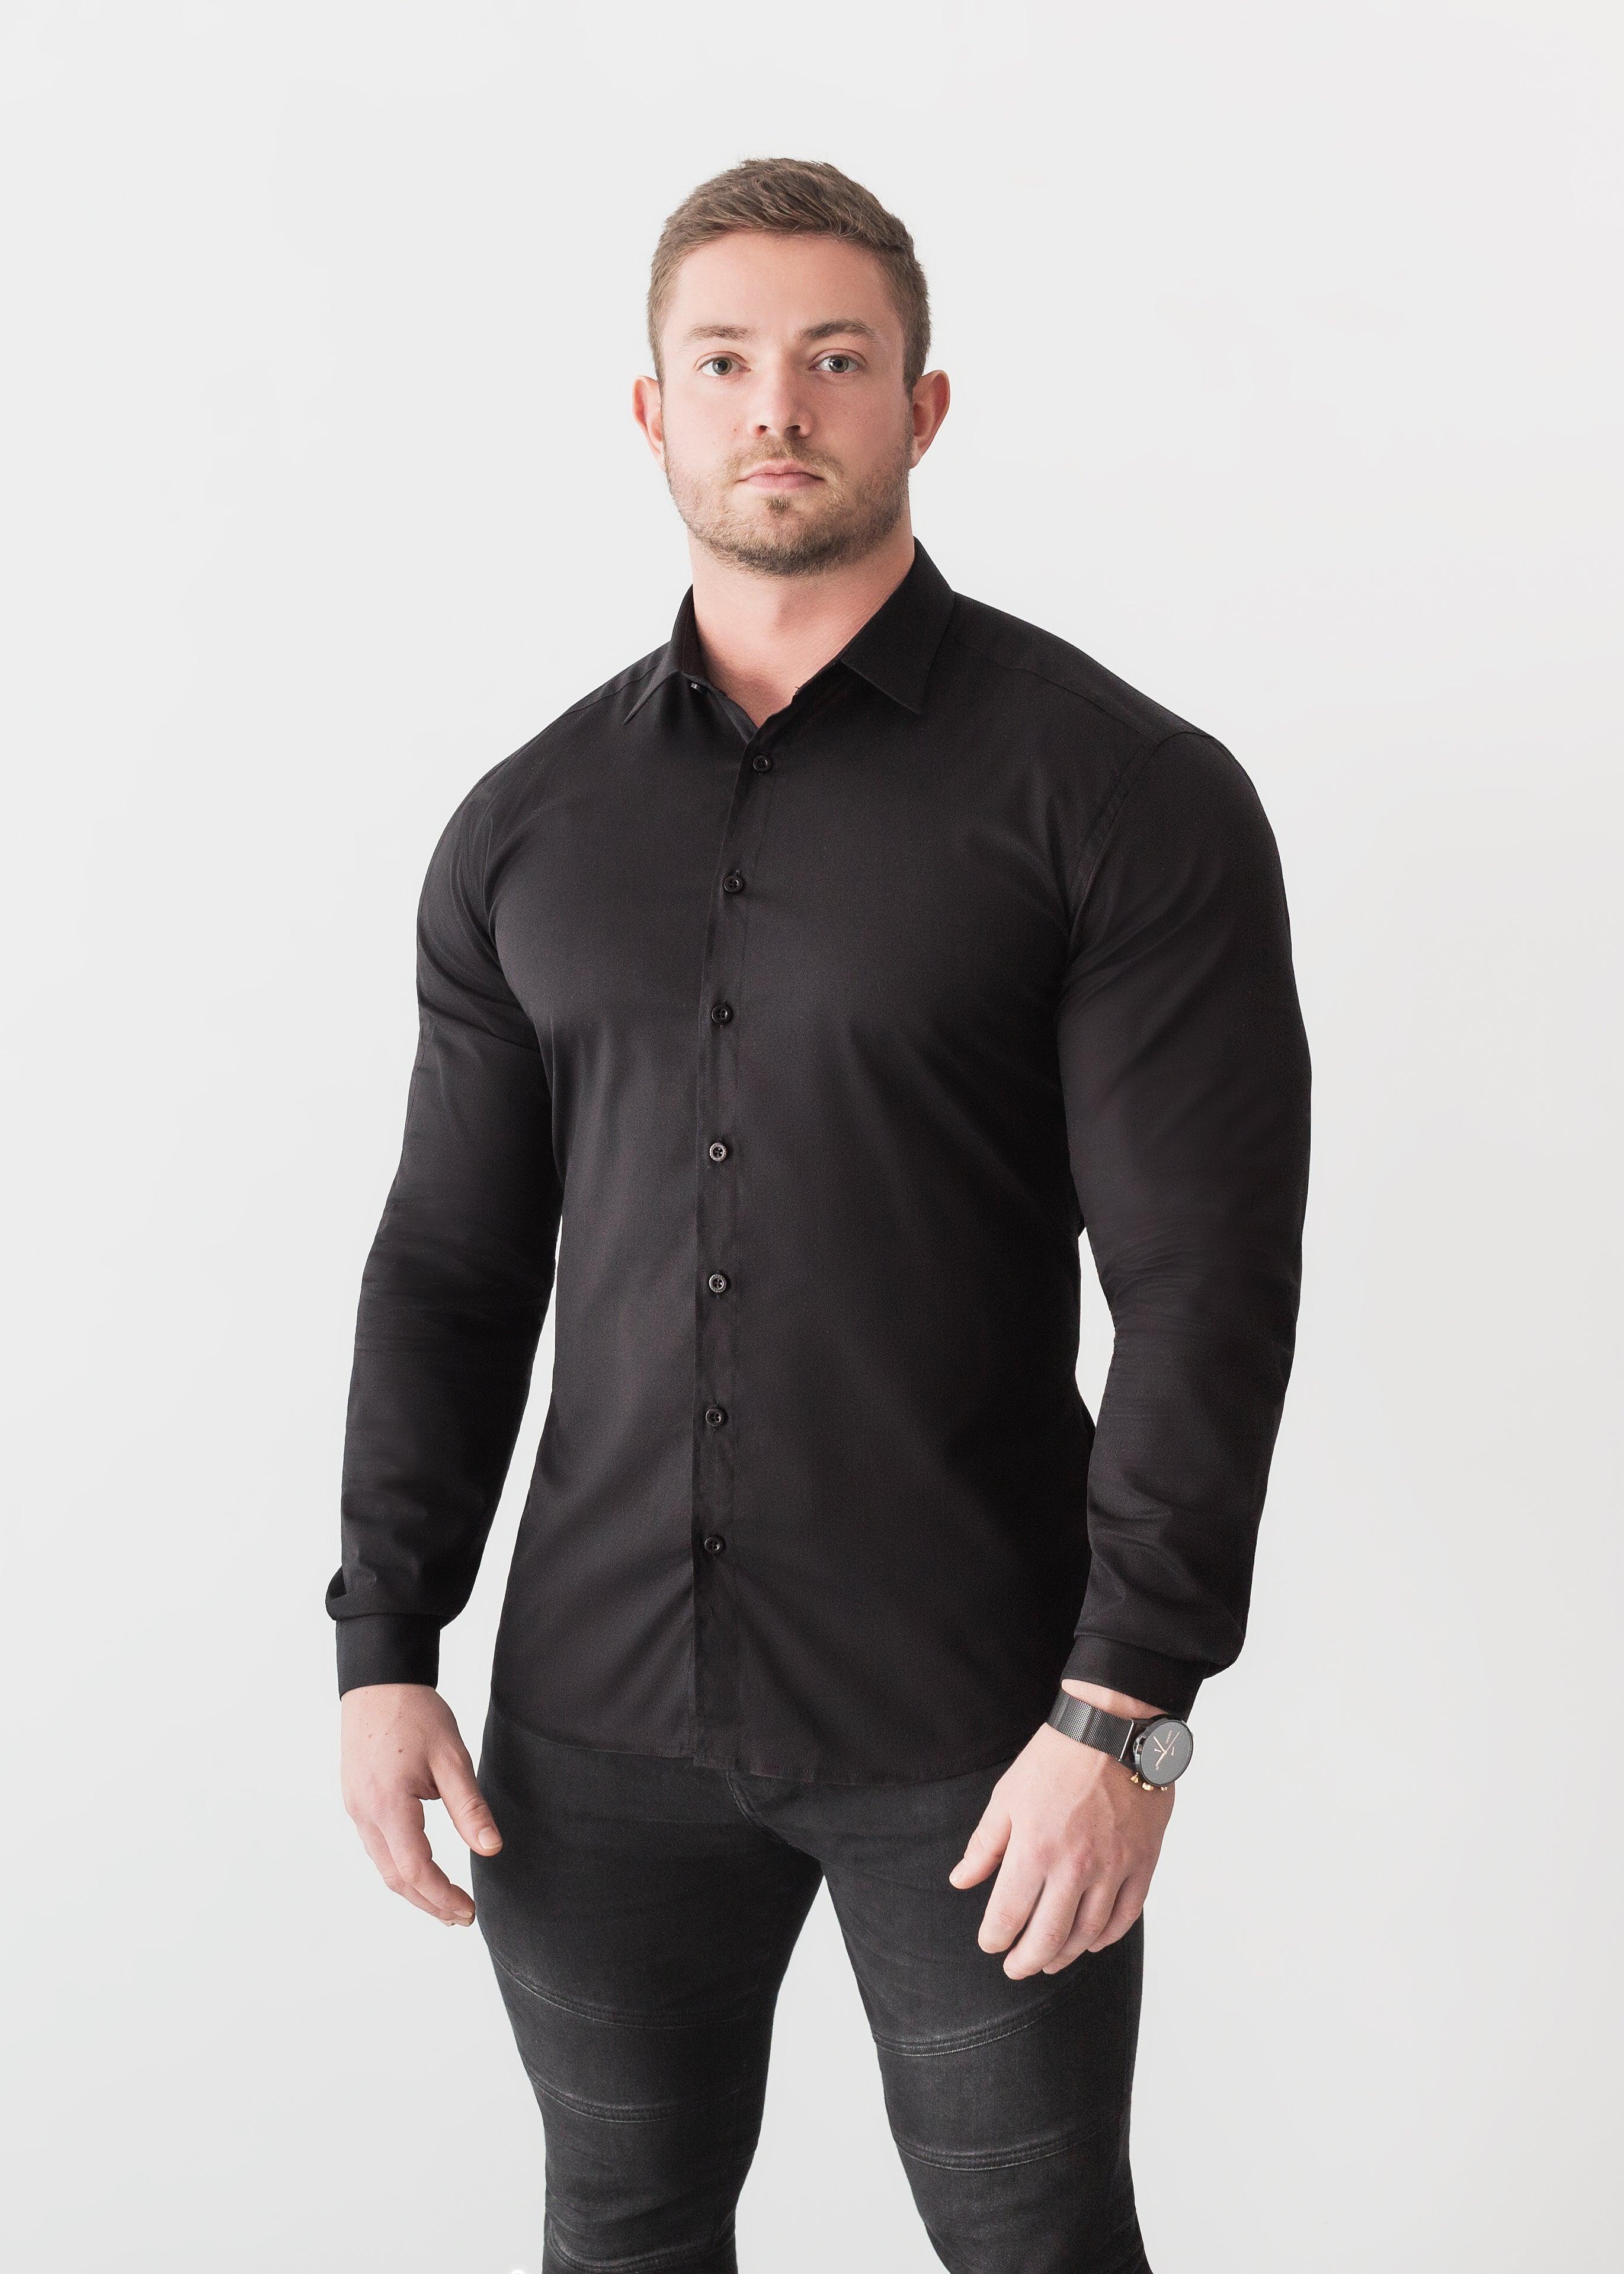 fusion Respectful No way Black Tapered Fit Shirt - Muscle Fit Black Shirt | Tapered Menswear